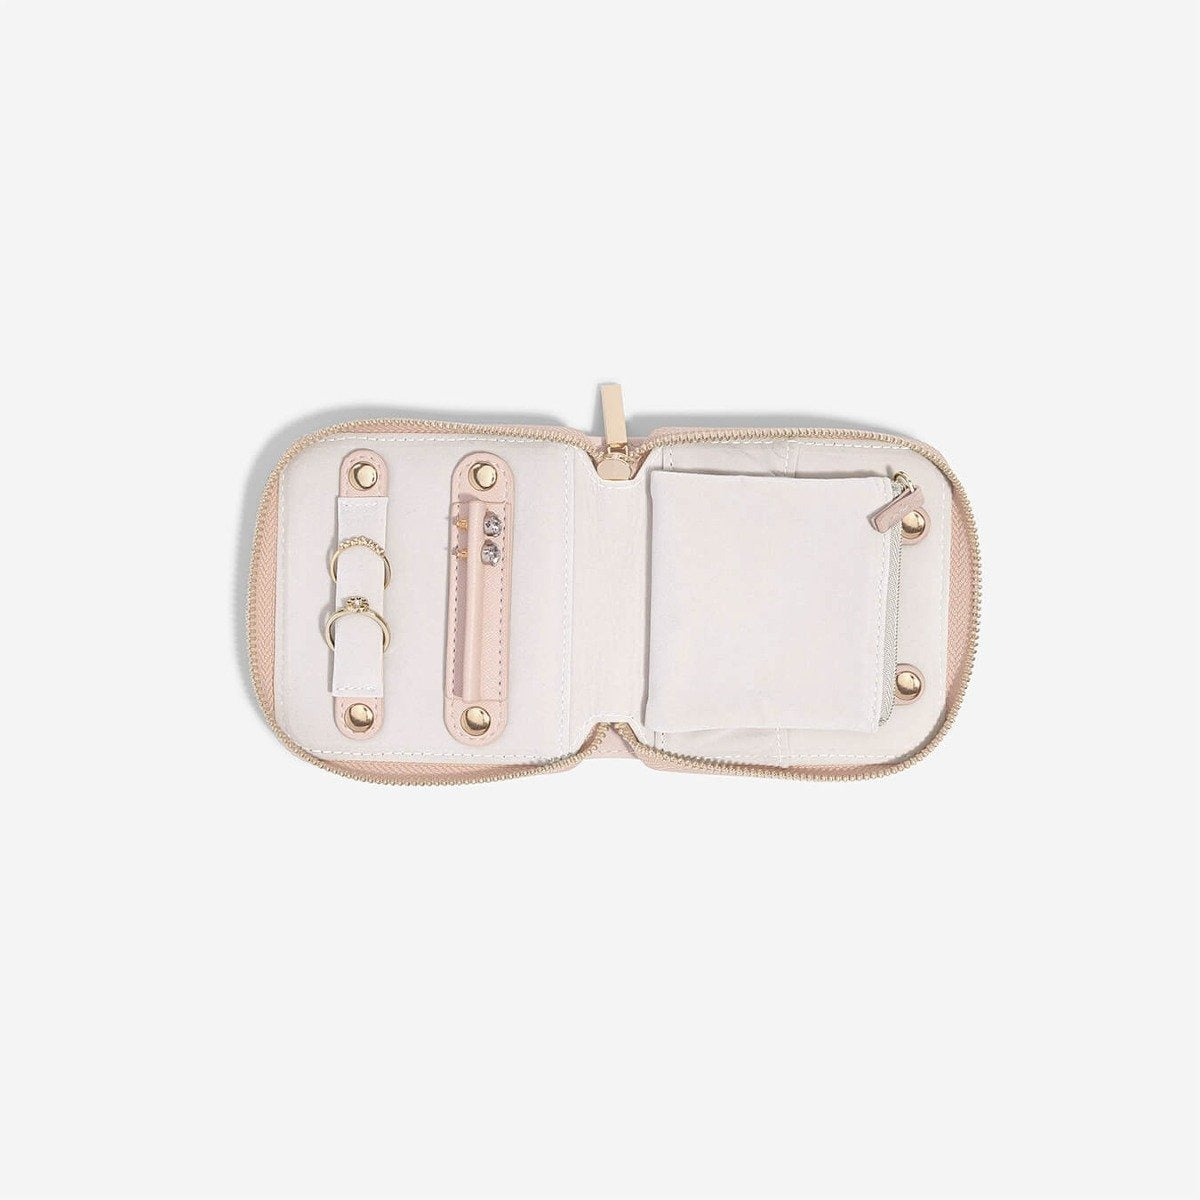 Stackers Compact Jewellery Wallet - Blush